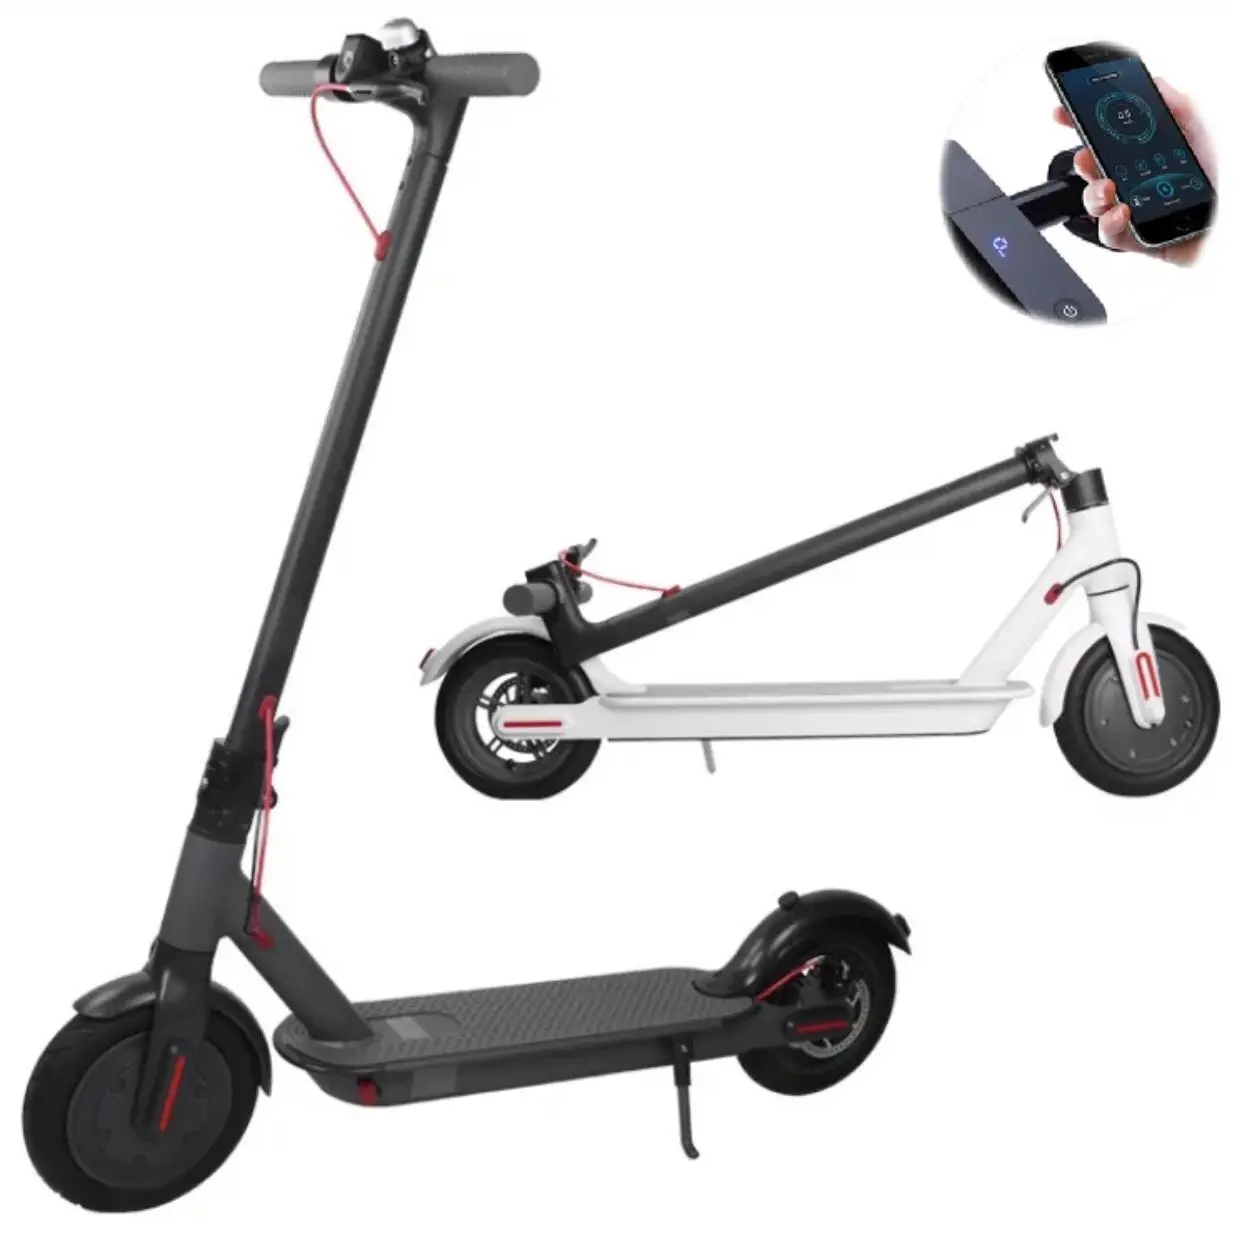 EU UK warehouse Dropshipping aovo pro scooter AH 7.7 AH 36v 350w cheap electric scooters aovo m365 pro with app, Customized color